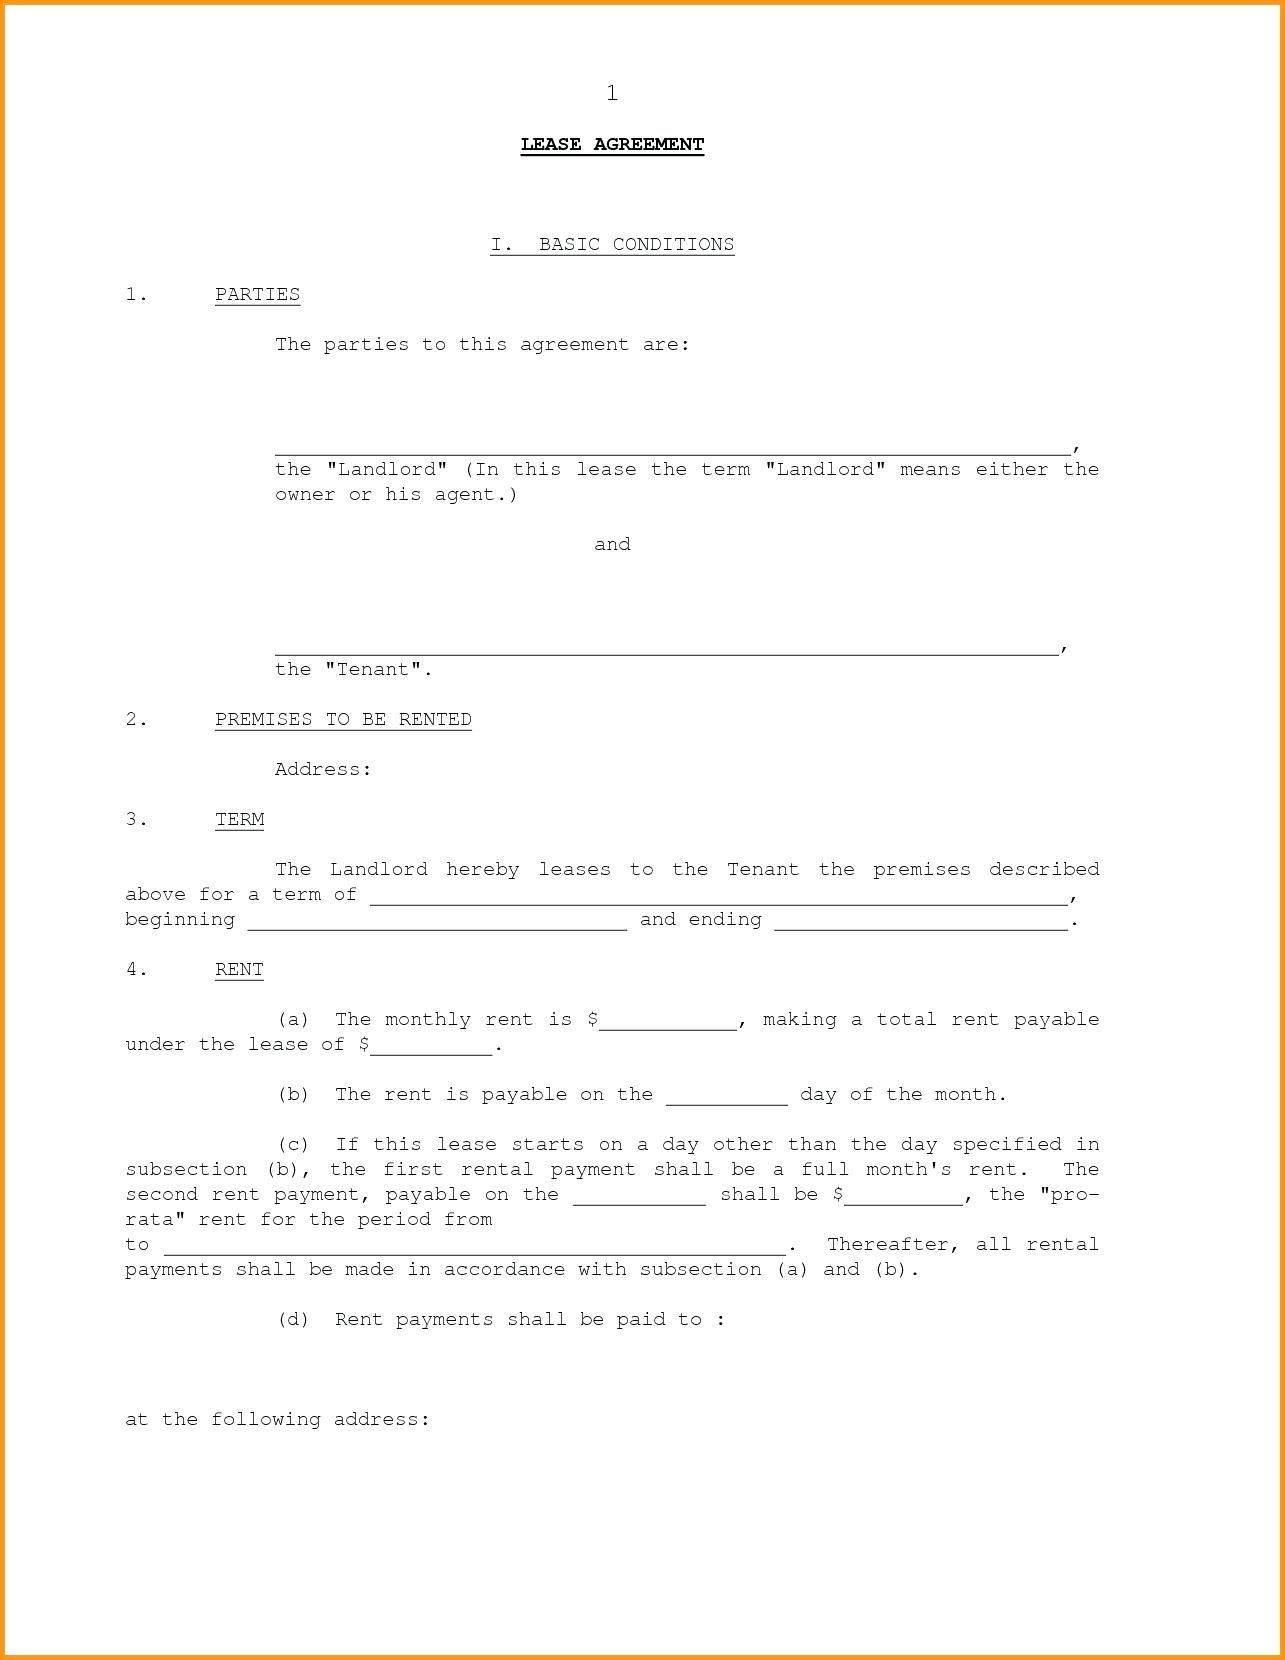 Lease Agreement Sample Form 025 Roommate Lease Agreement Template Ideas Simple Form Forms Fresh